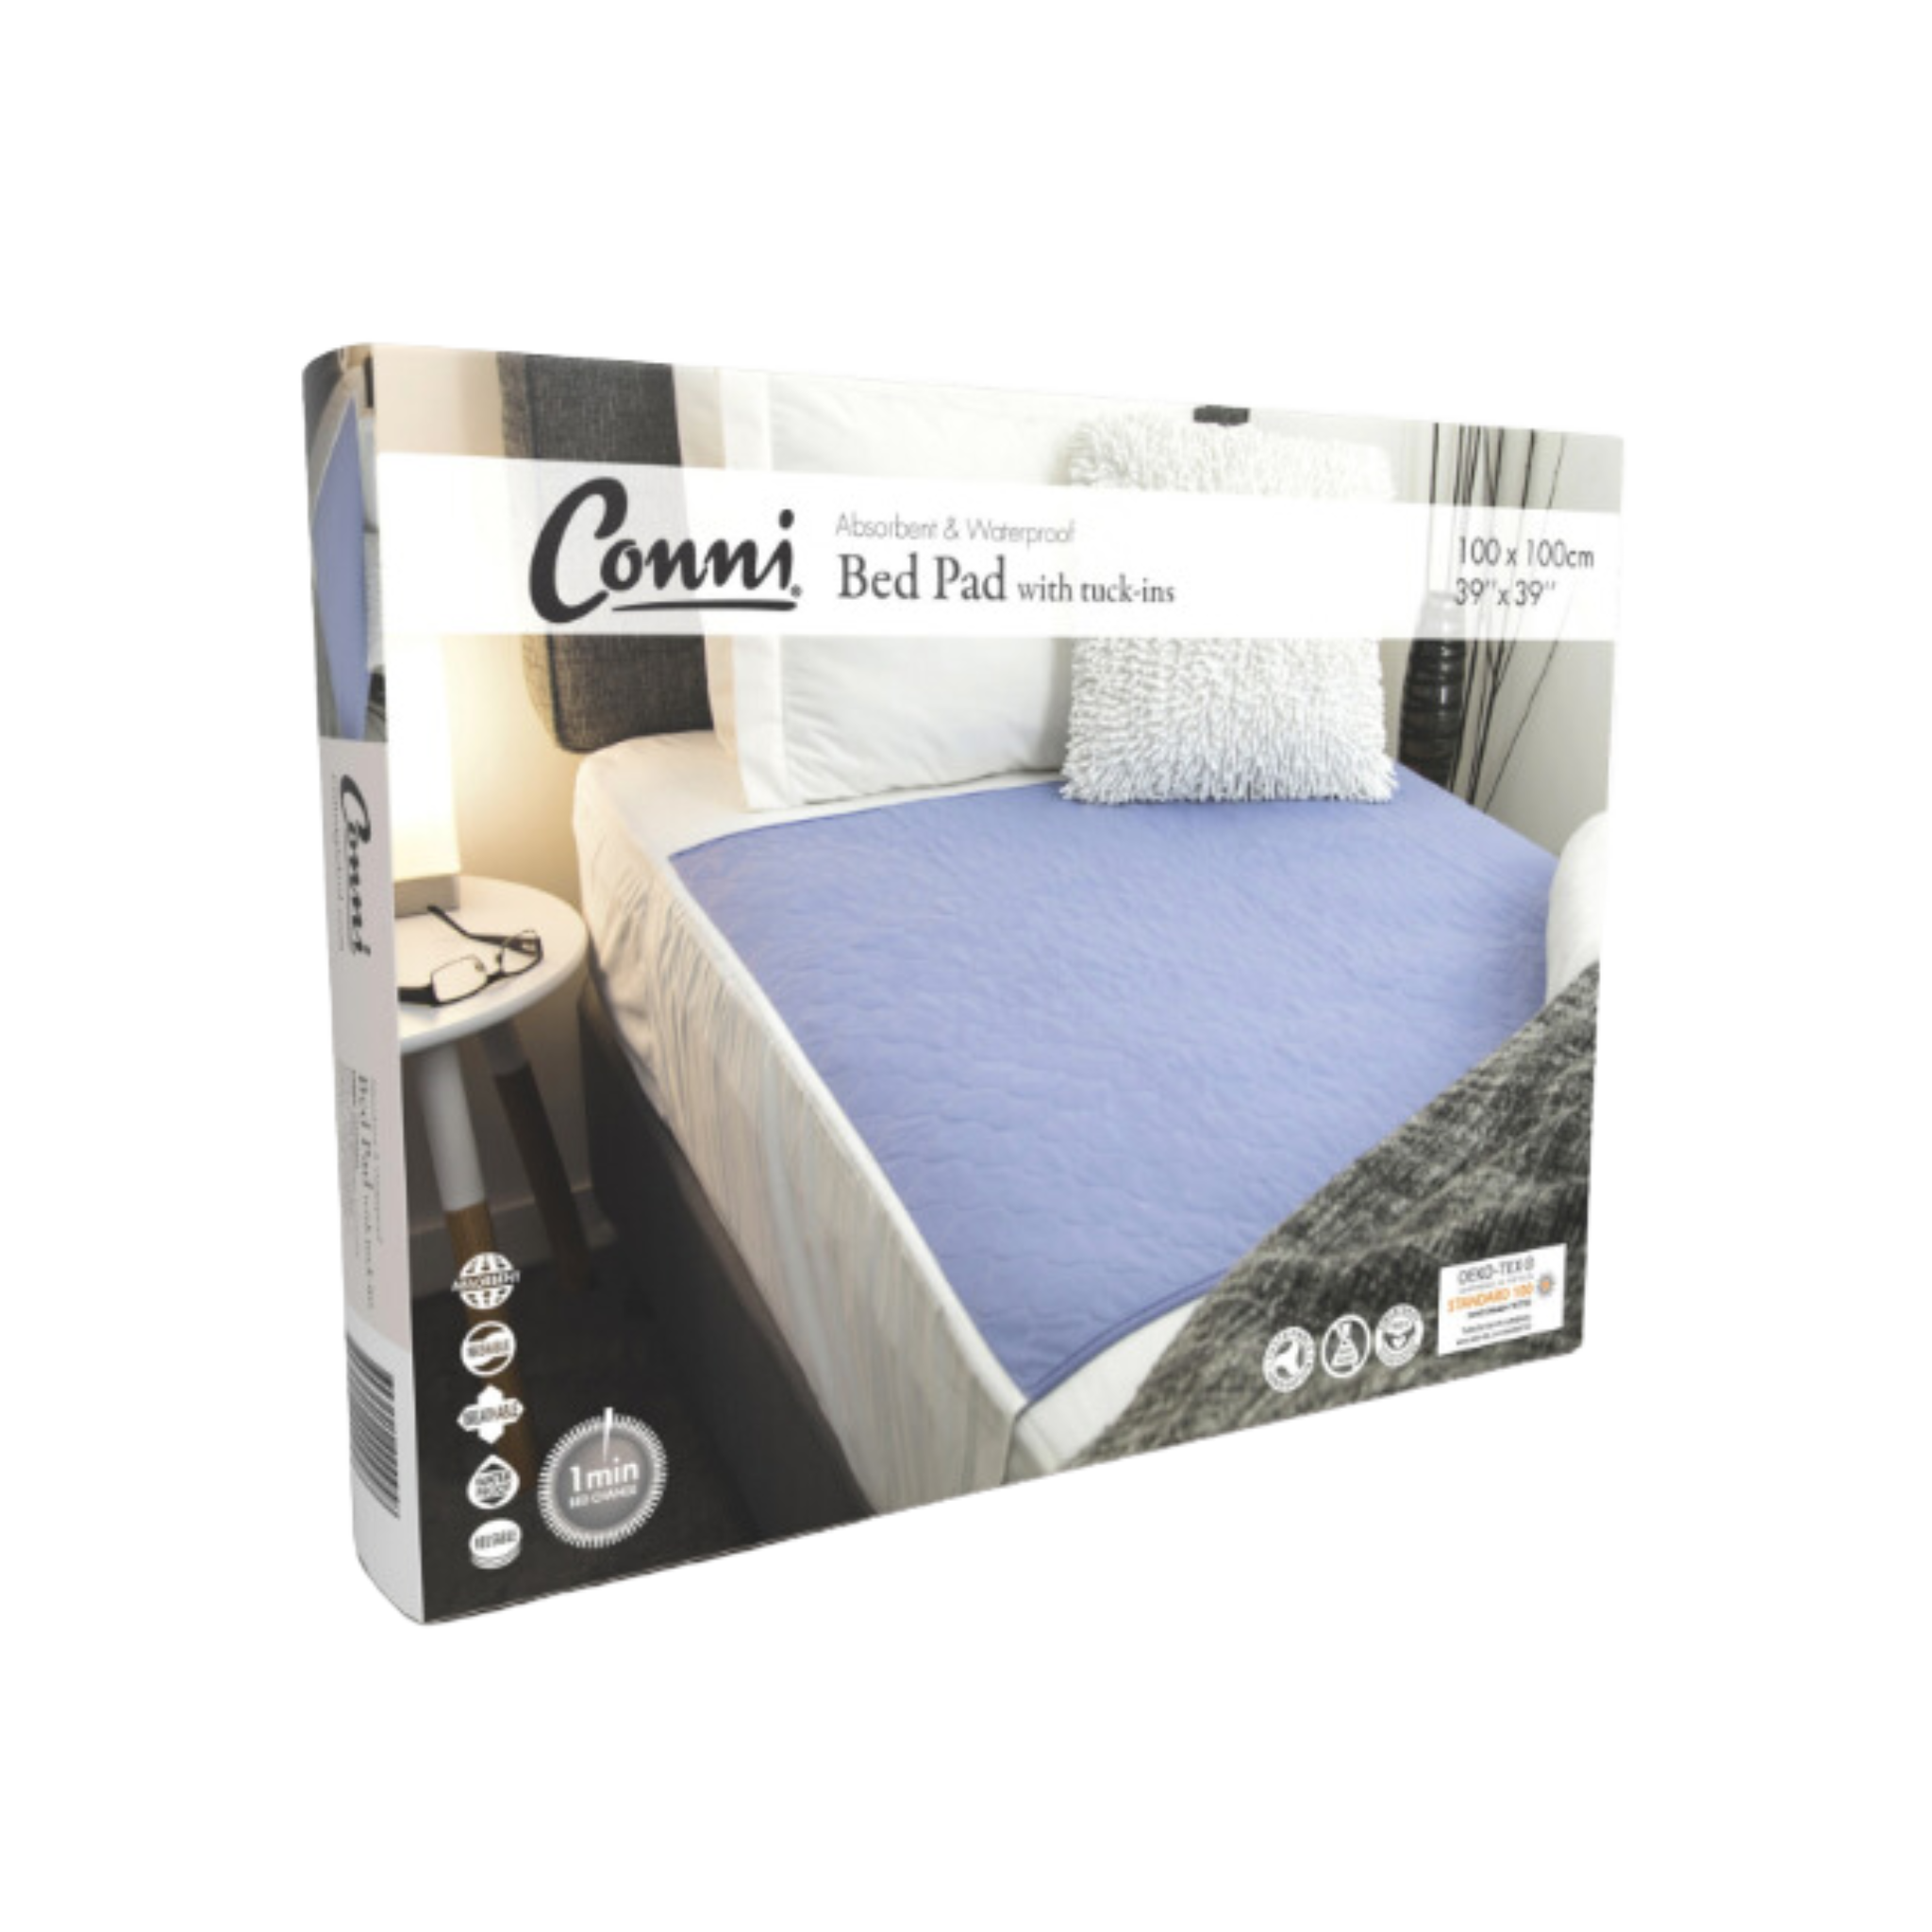 Conni Bed Pad With Tuck-Ins